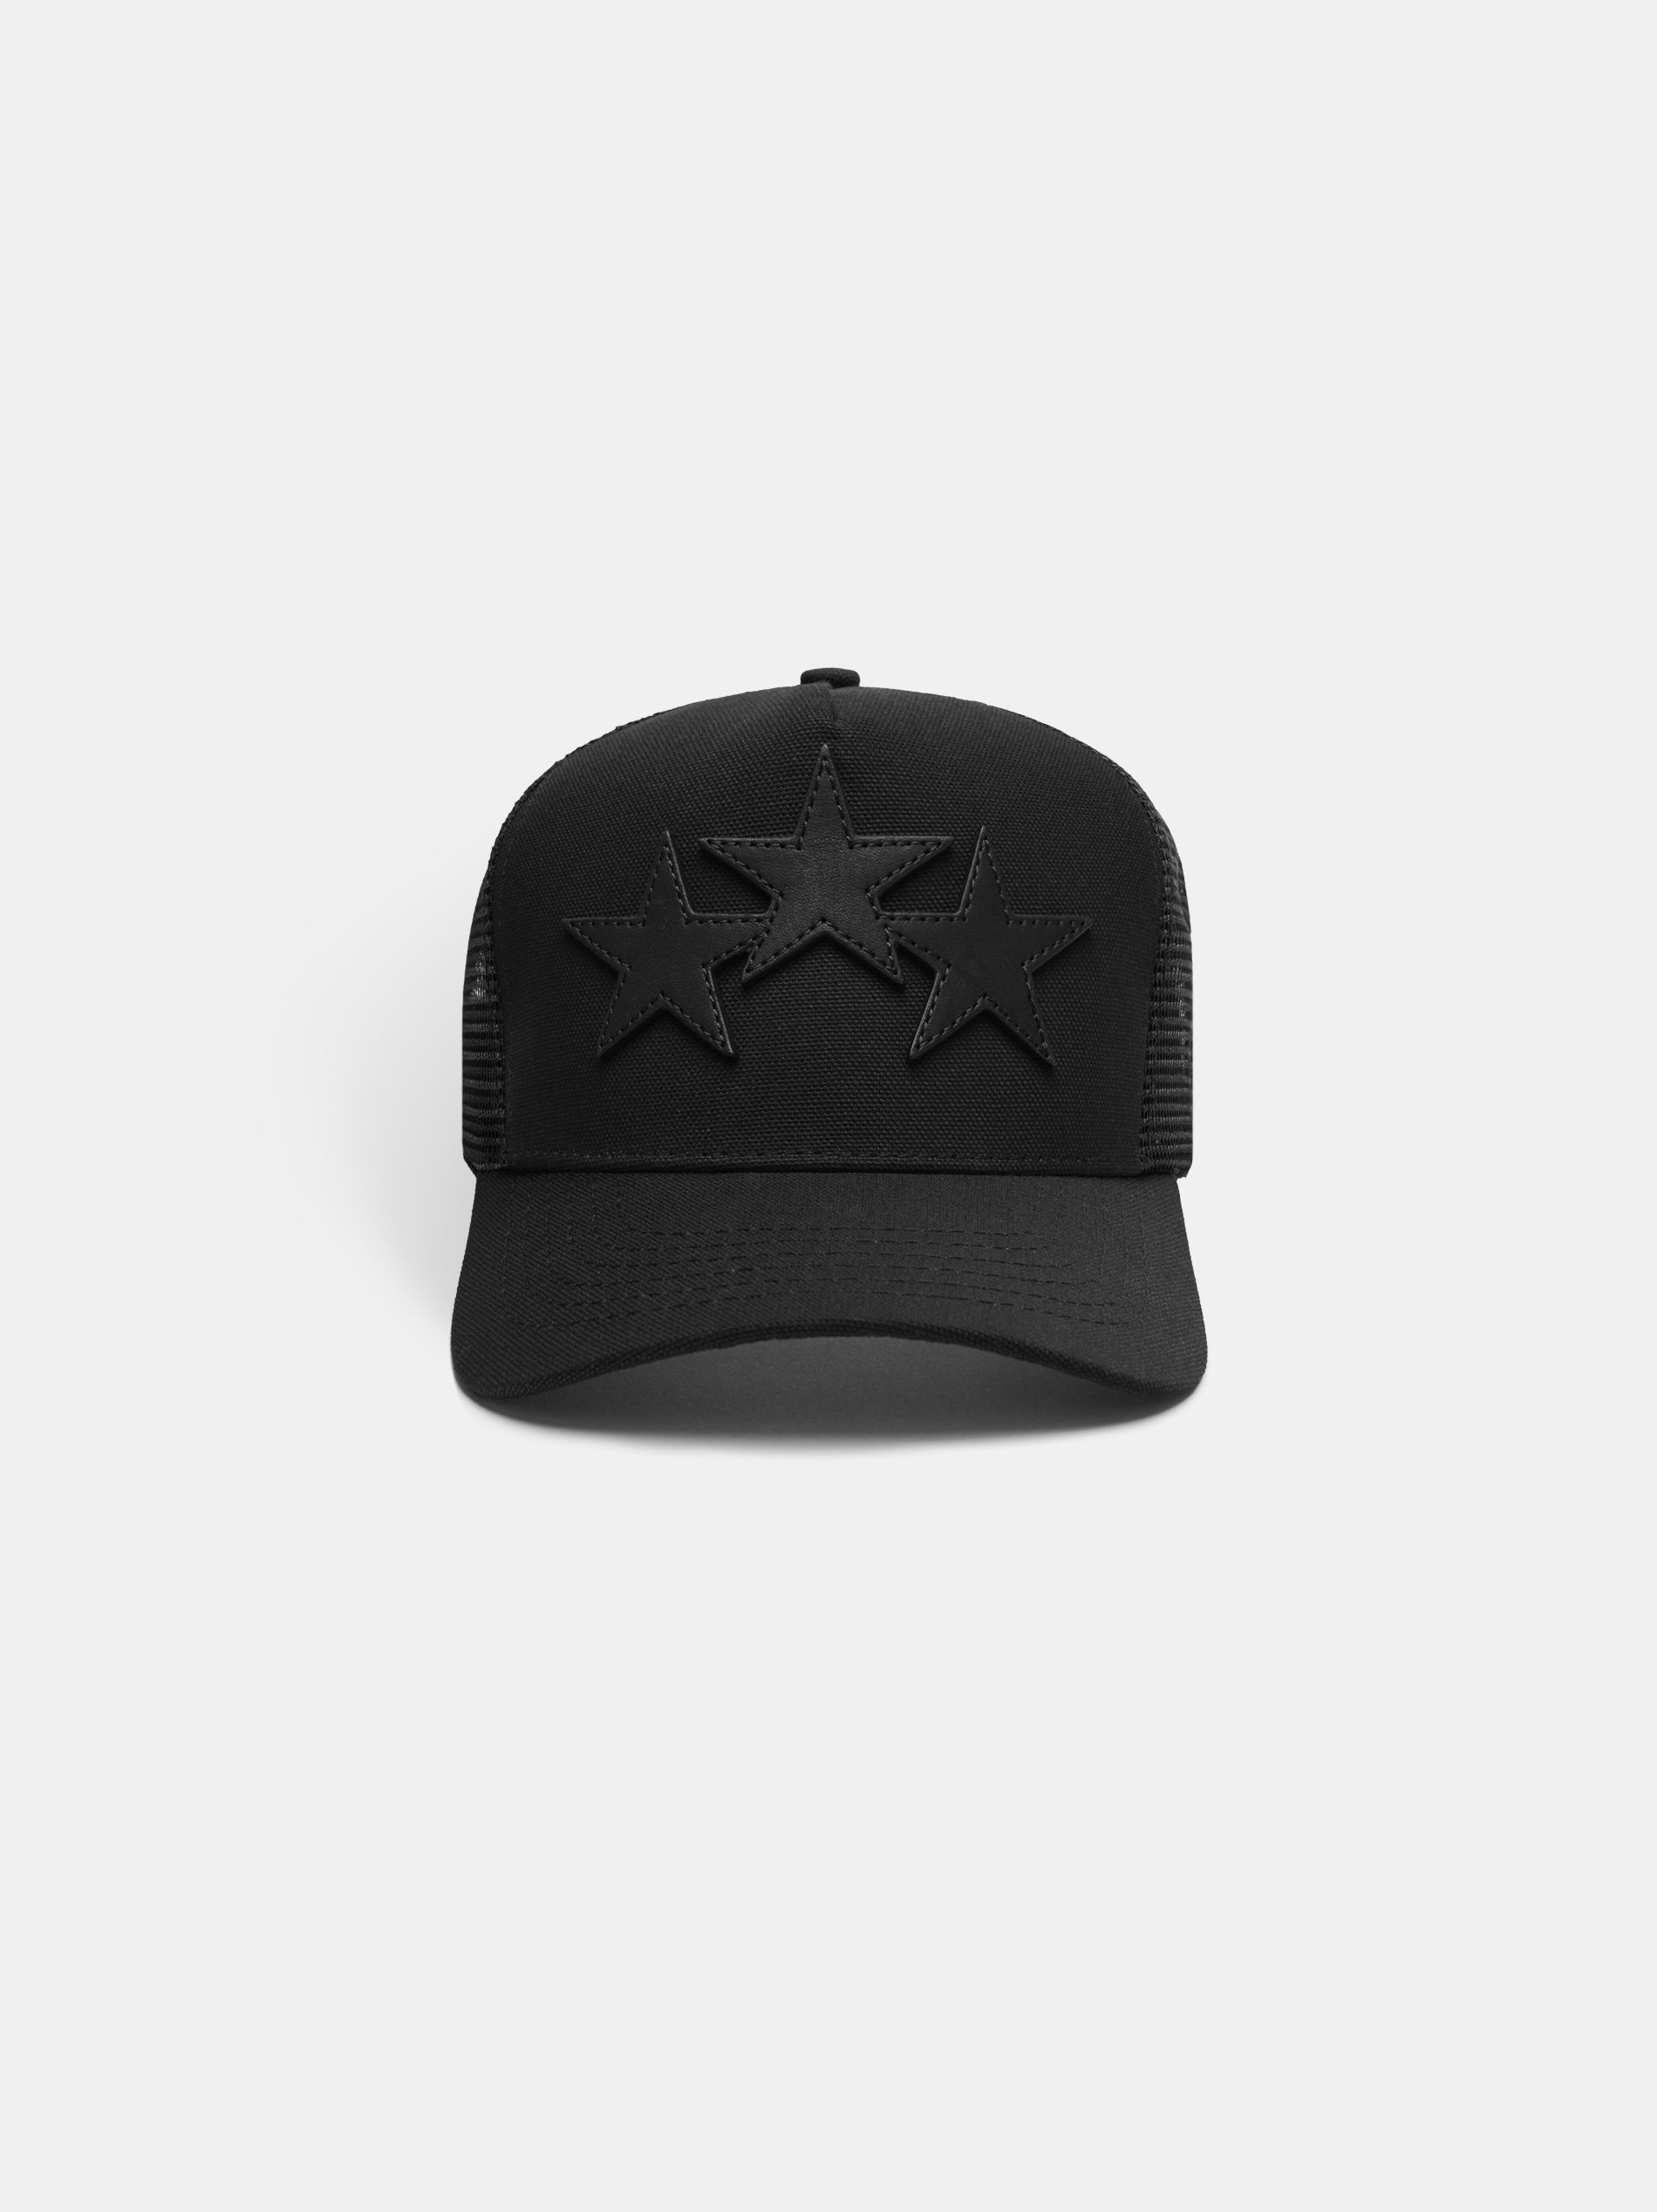 Product 3 STAR TRUCKER HAT - BLACK BLACK featured image